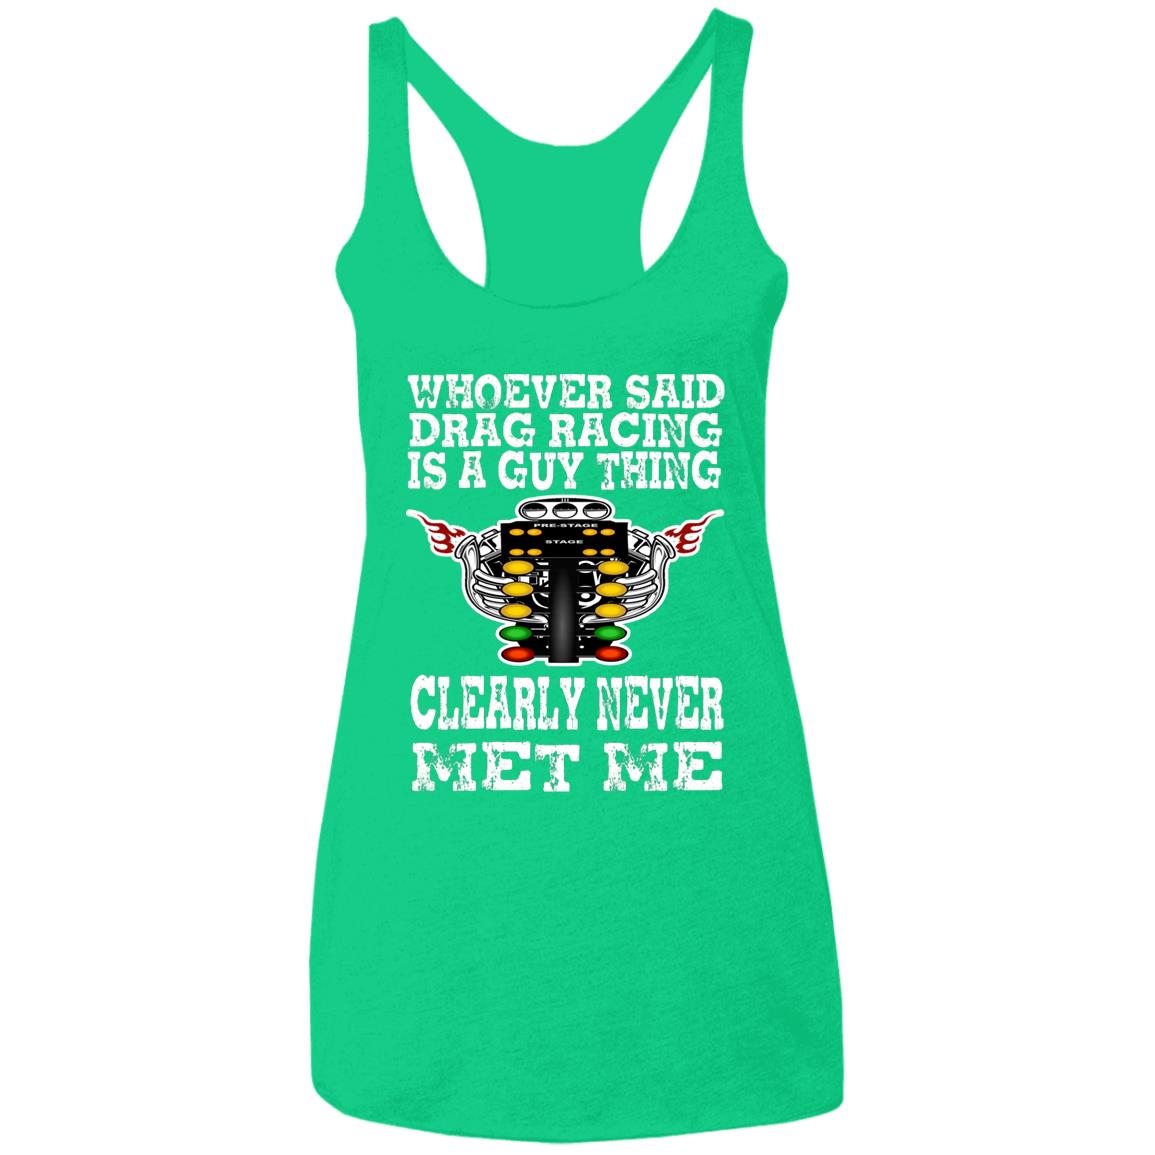 Whoever Said Drag Racing Is A Guy Thing Ladies' Triblend Racerback Tank